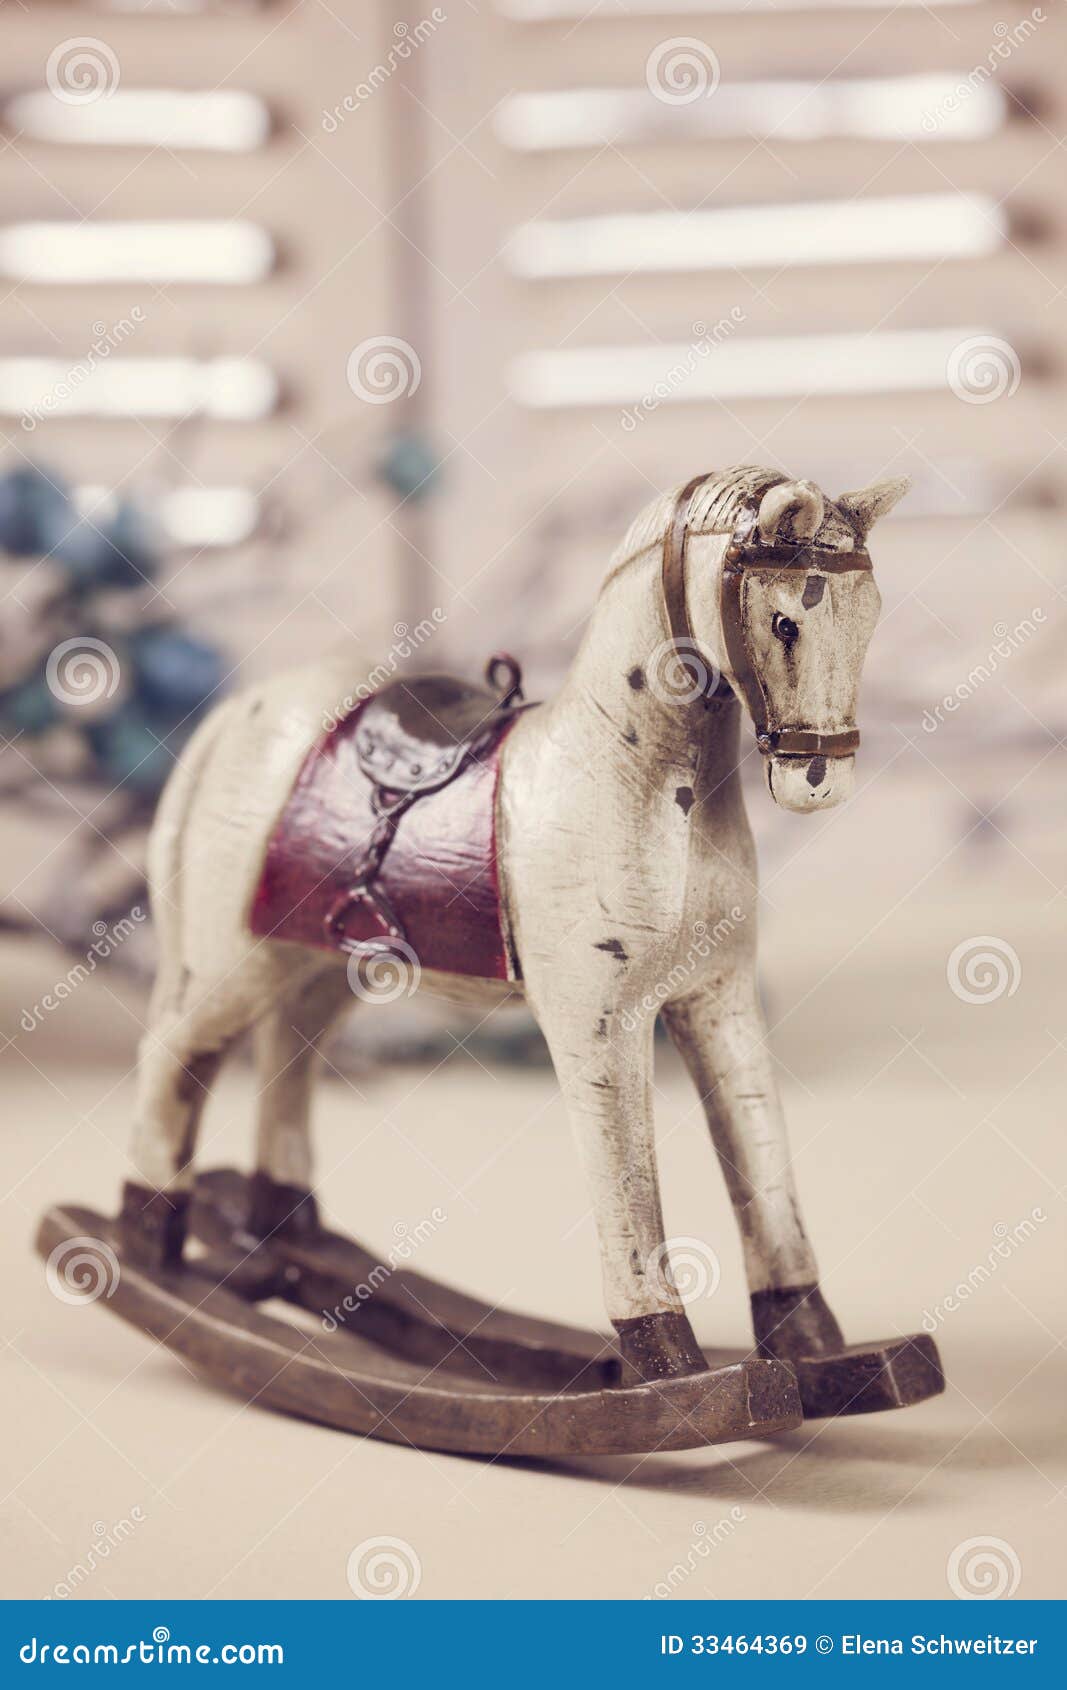 Wooden Rocking Horse Royalty Free Stock Images - Image 